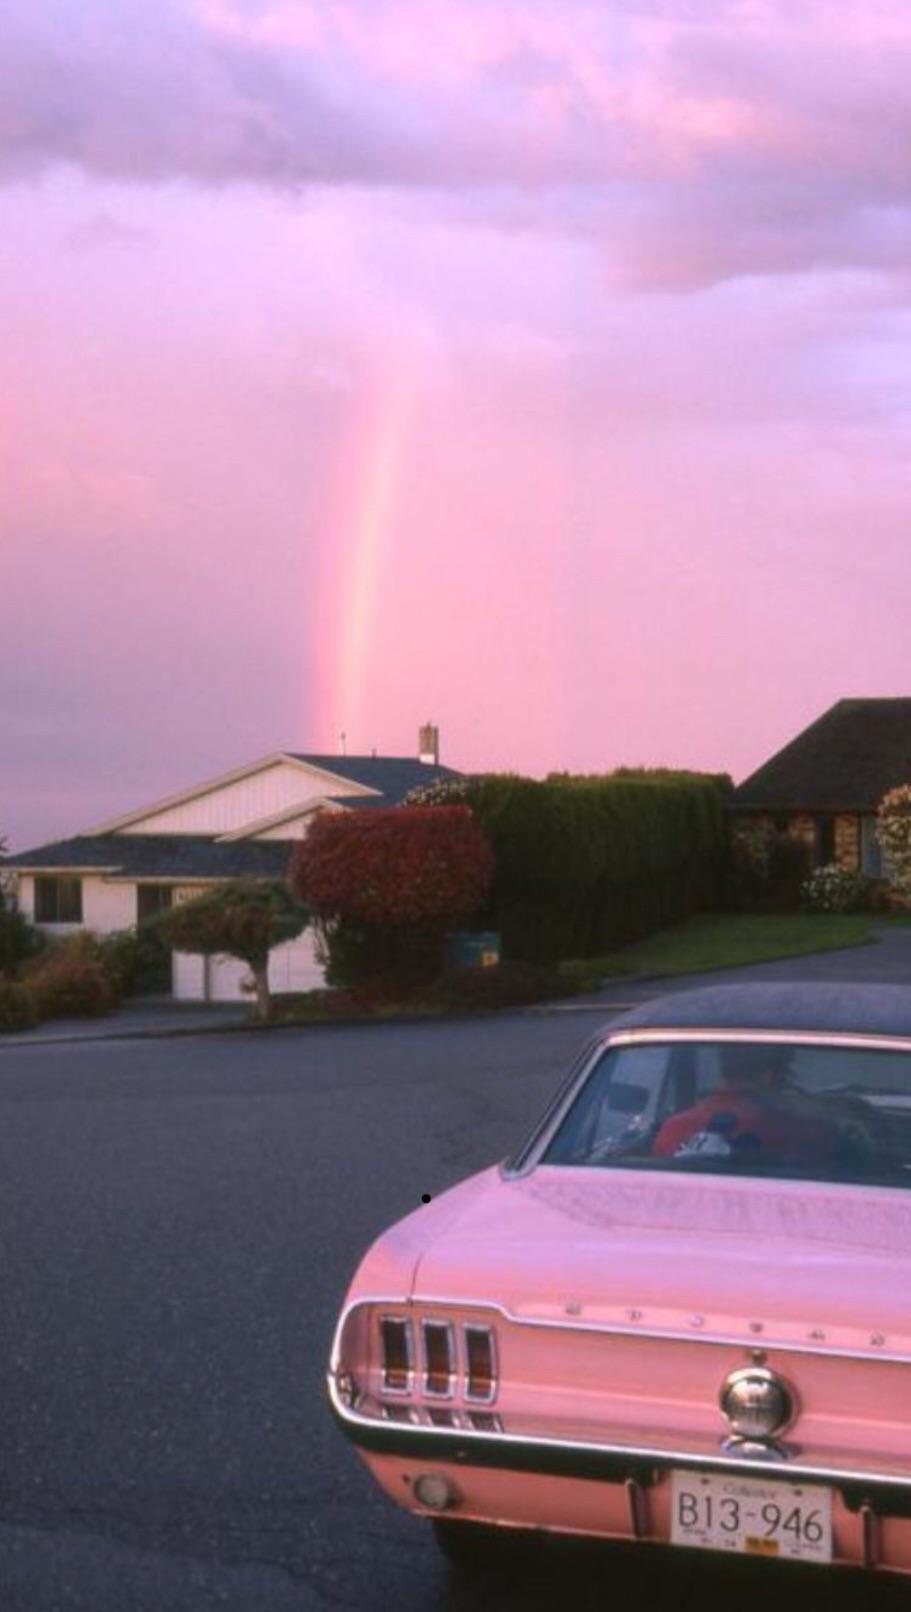 A pink car parked in front of houses - Pink, 90s, cars